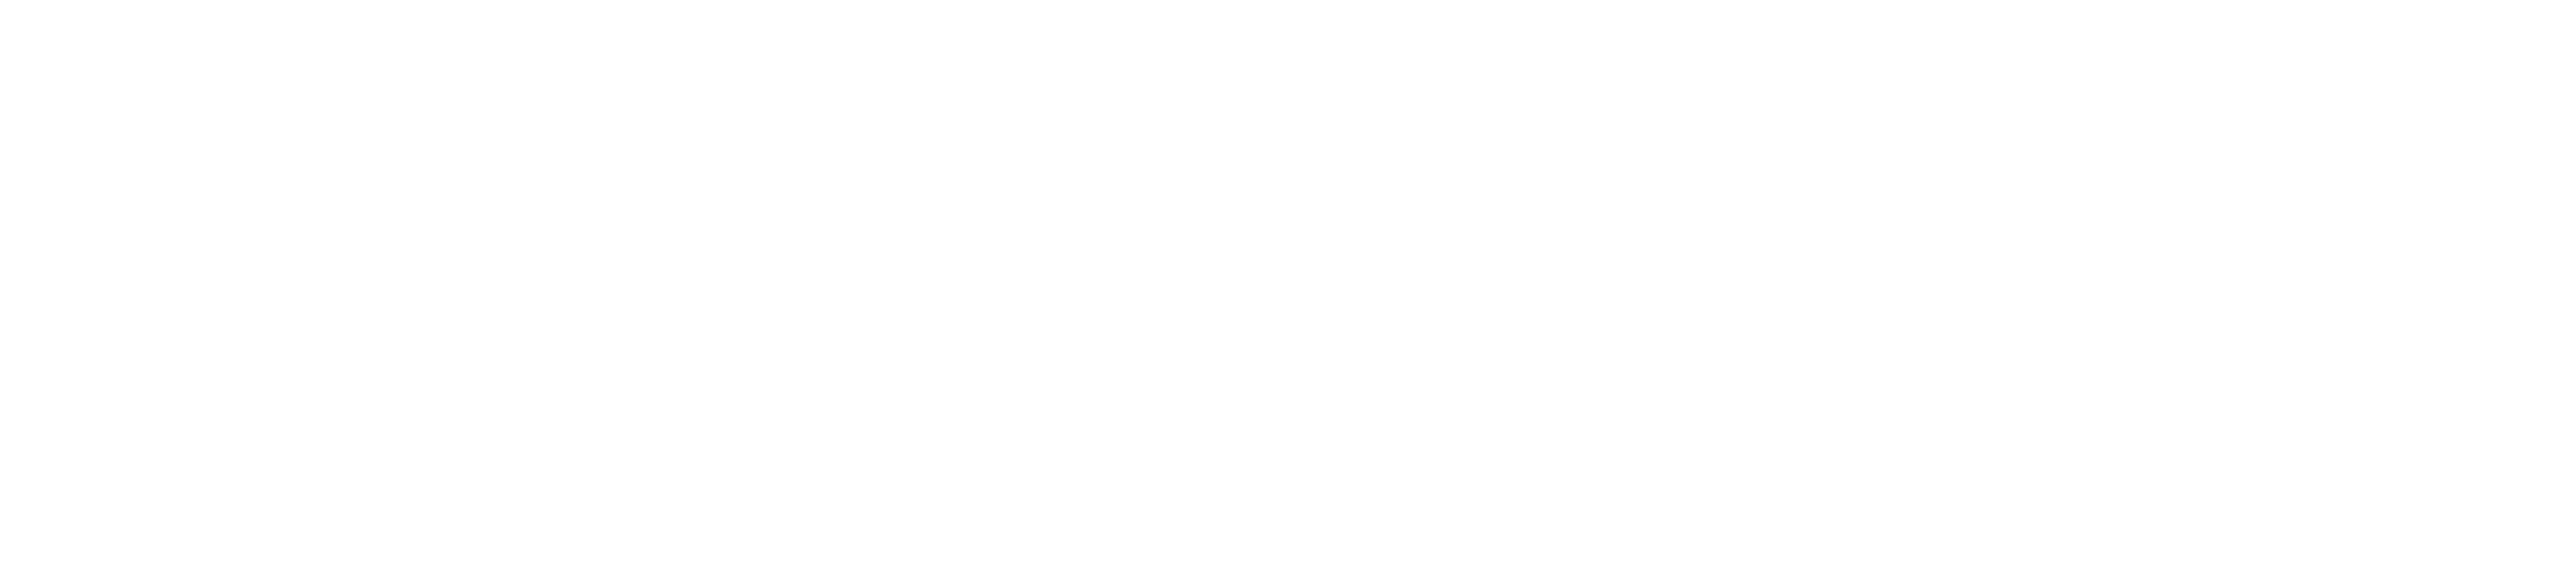 Granite Growth Health Partners is a growth equity firm exclusively focused on health services companies.